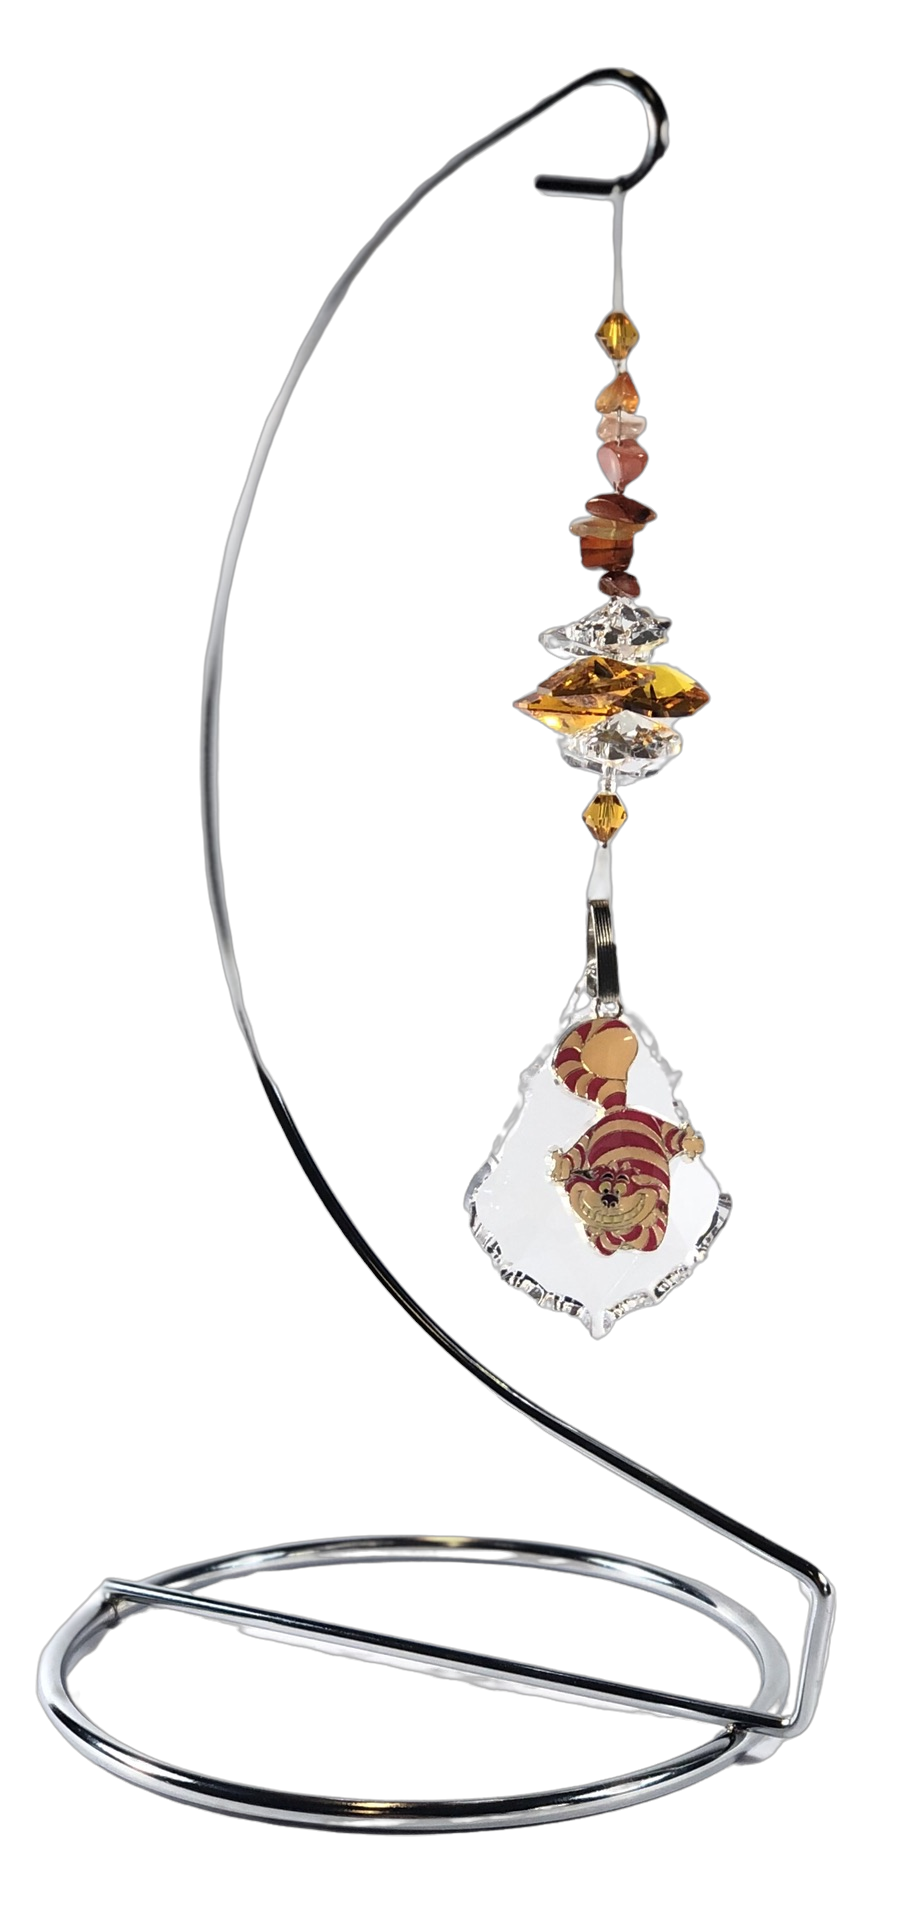 Alice in Wonderland - Cheshire Cat crystal suncatcher is decorated with carnelian gemstones and come on this amazing stand.